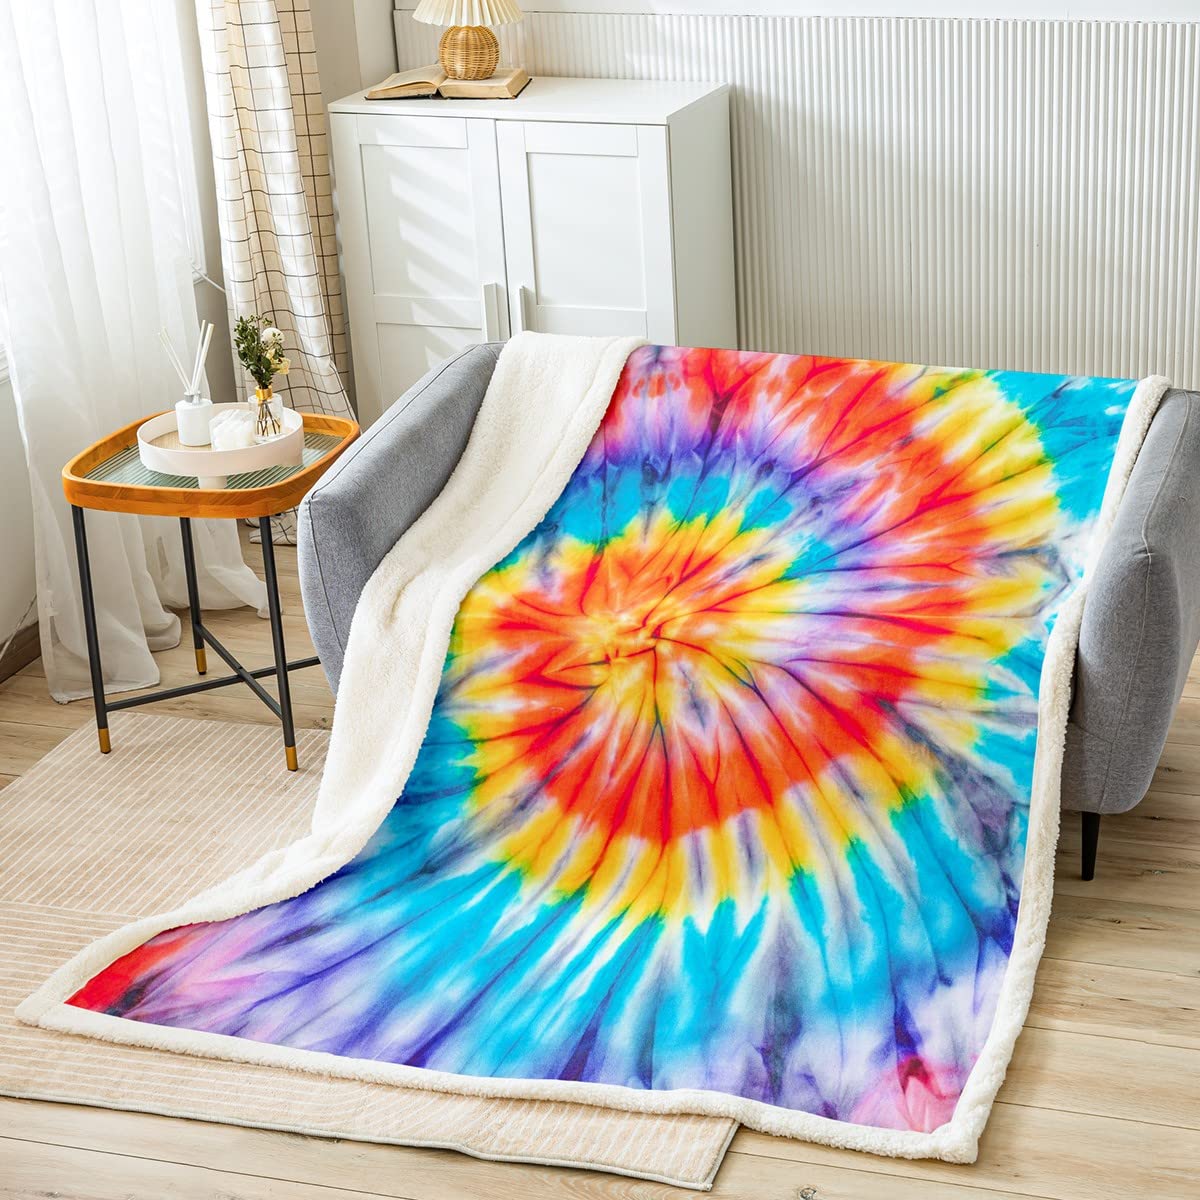 How To Tie-Dye A Blanket